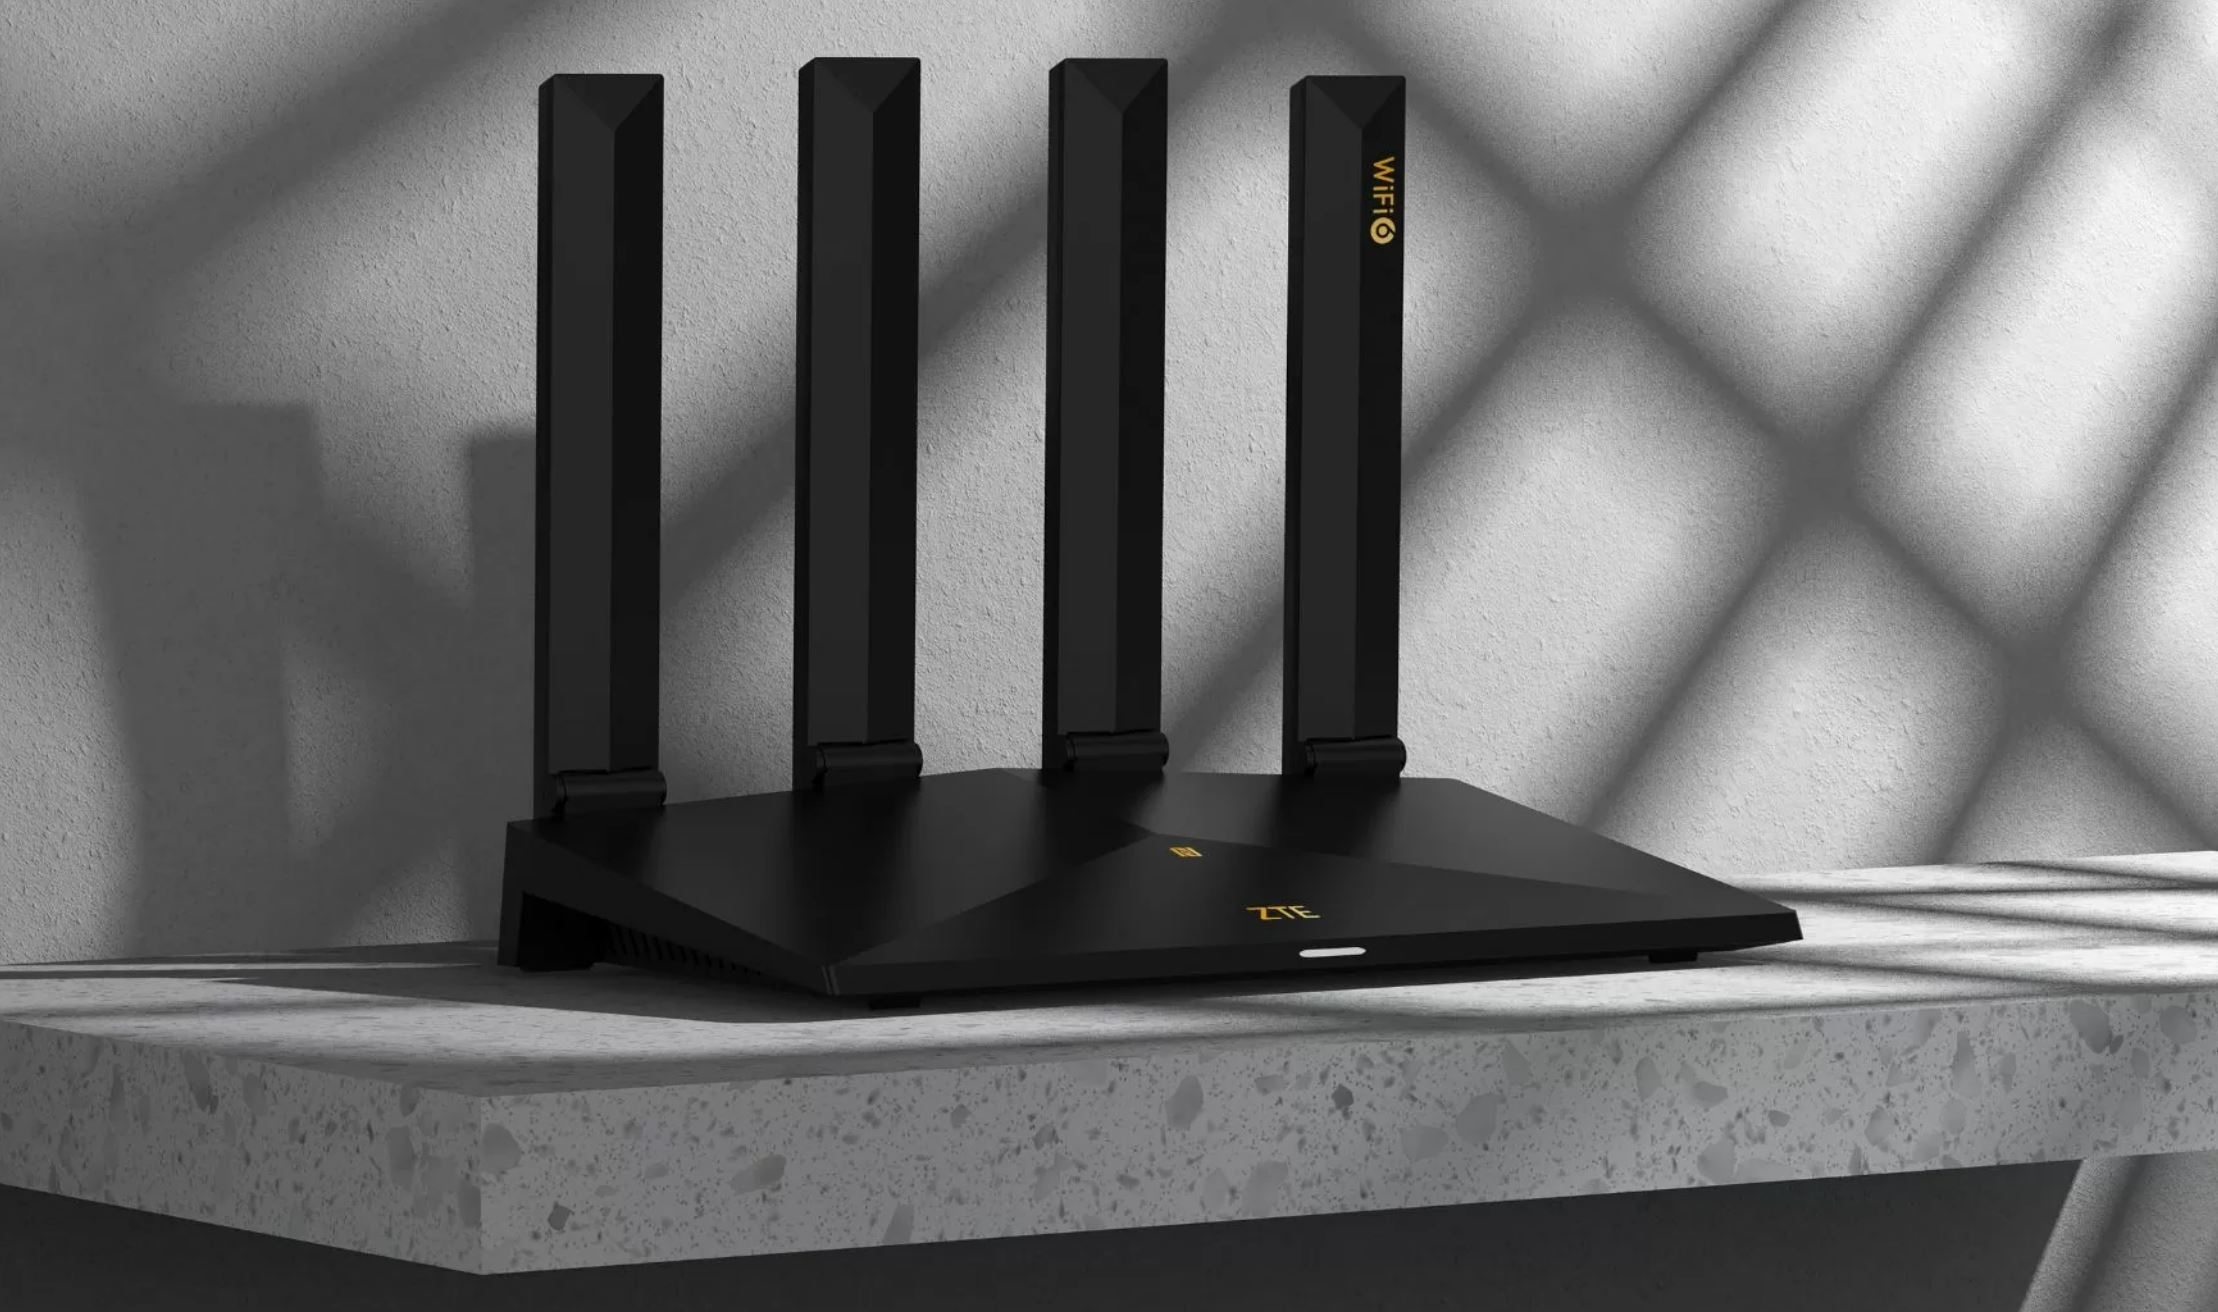 Mass production of routers with Wi-Fi 6 support will be launched in Russia. According to the plan, by the end of 2024, 500 thousand pieces should be produced